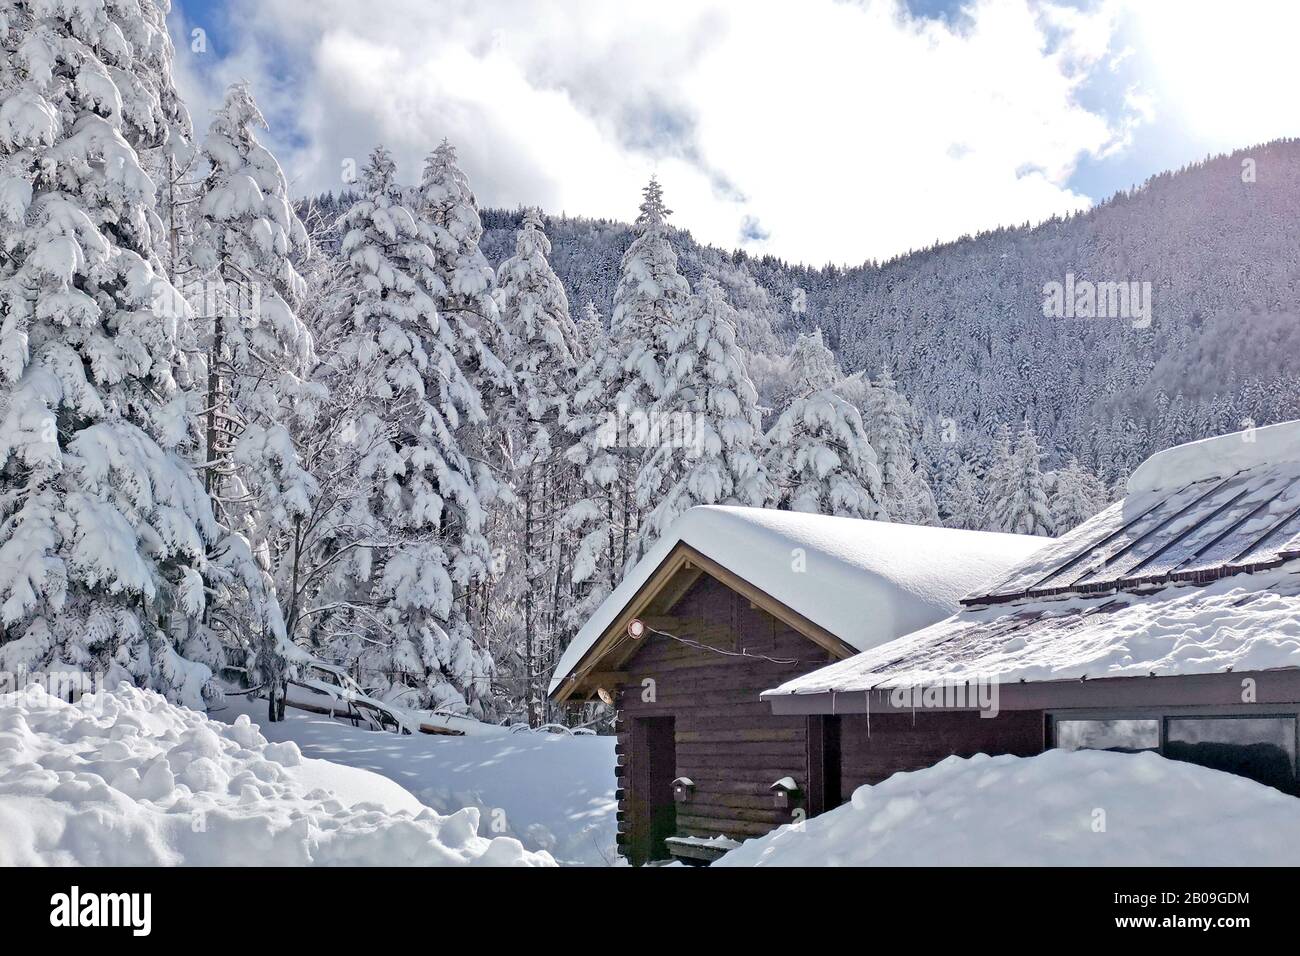 The wooden house, trees with snow in Japan mountains Stock Photo